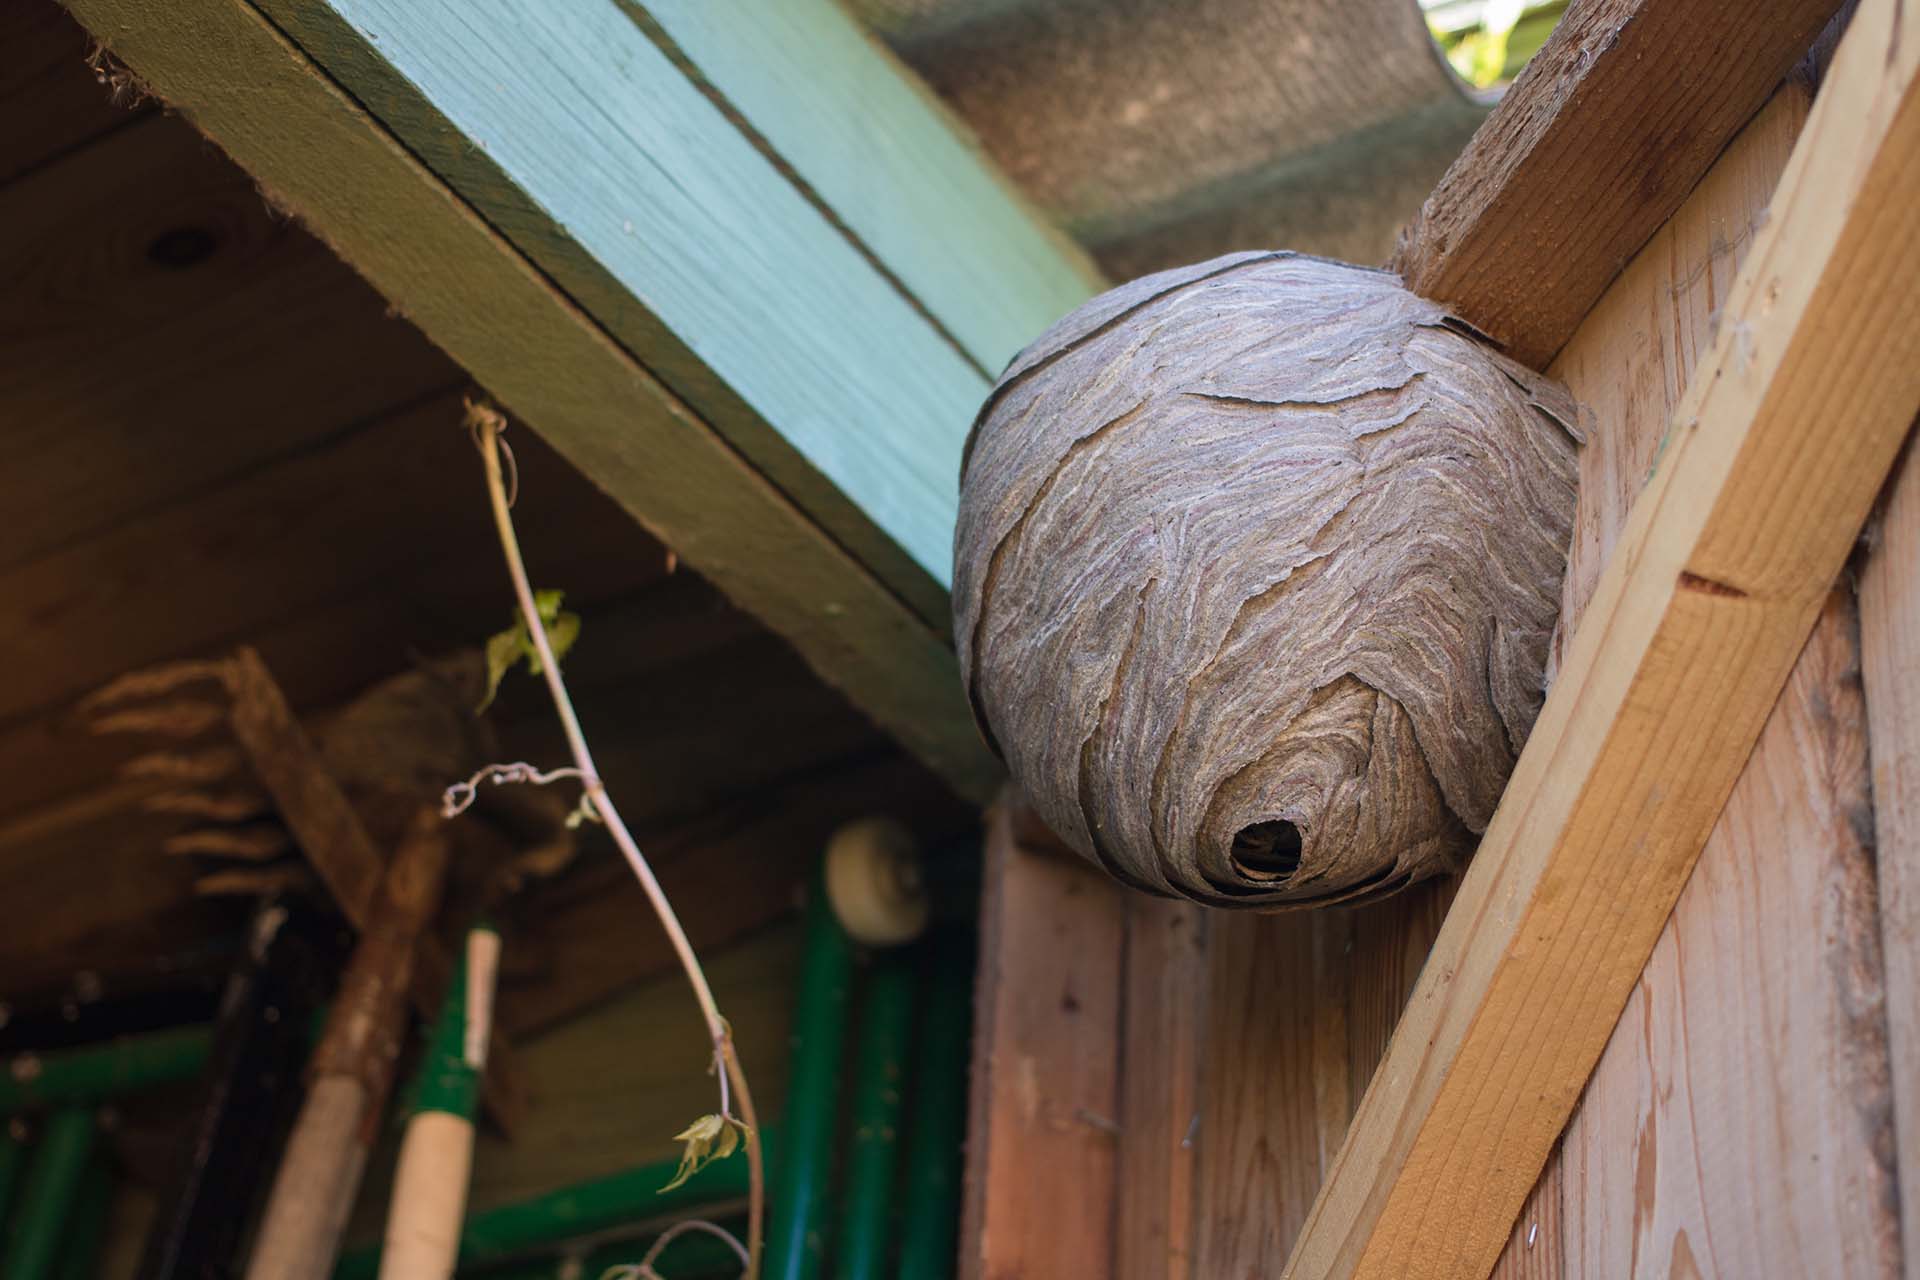 How to Spot Wasp Activity - picture shows a wasp nest in a shed